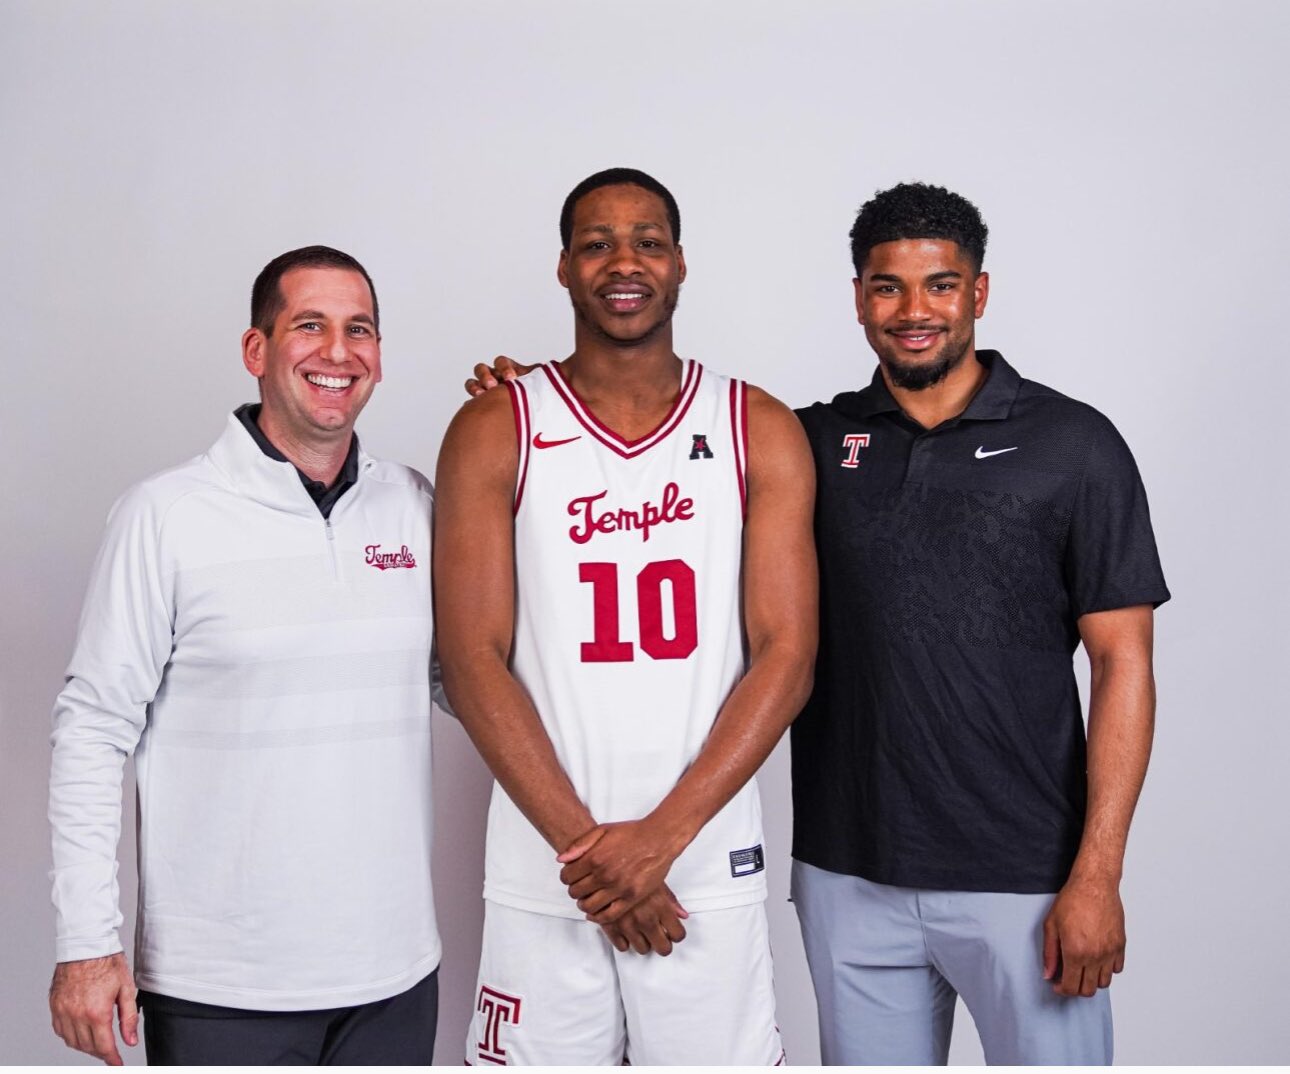 Temple coach Adam Fisher (left) got a commitment from Jameel Brown, who reunited with former teammate Camren Wynter. (Photo: Temple athletics)